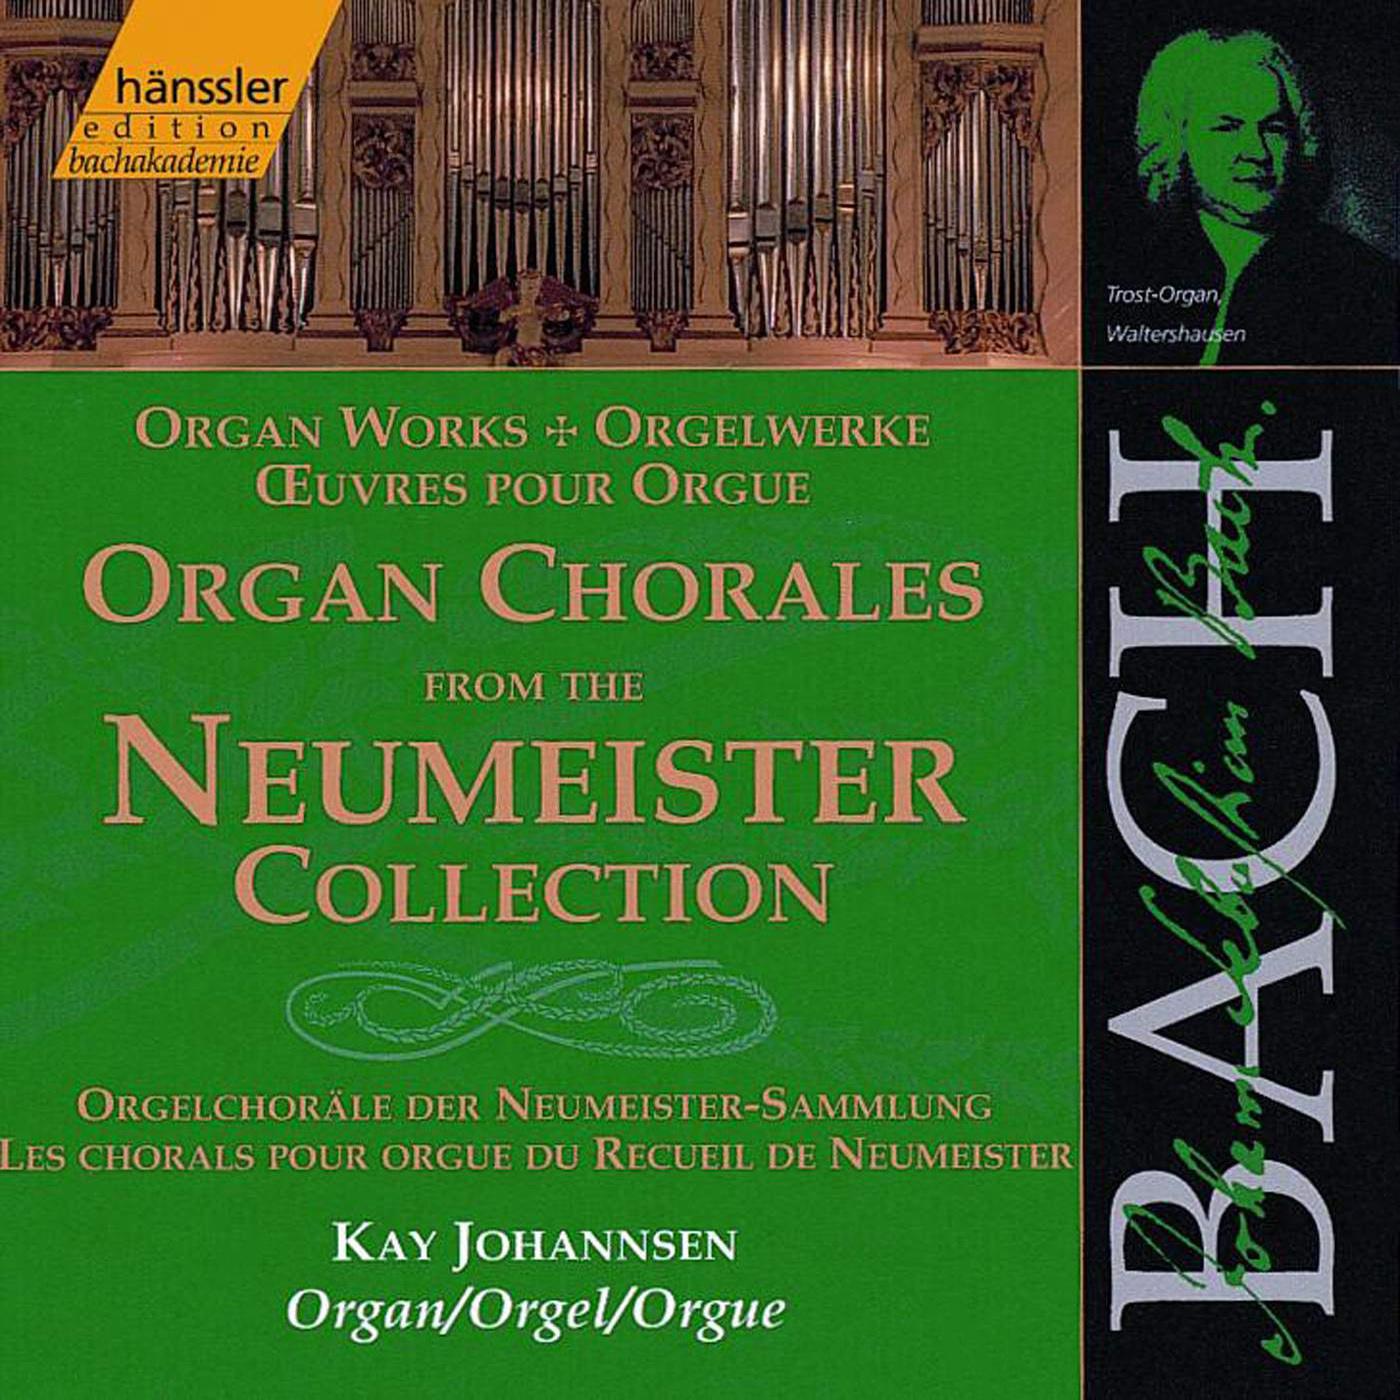 BACH, J.S.: Organ Chorales from the Neumeister Collection